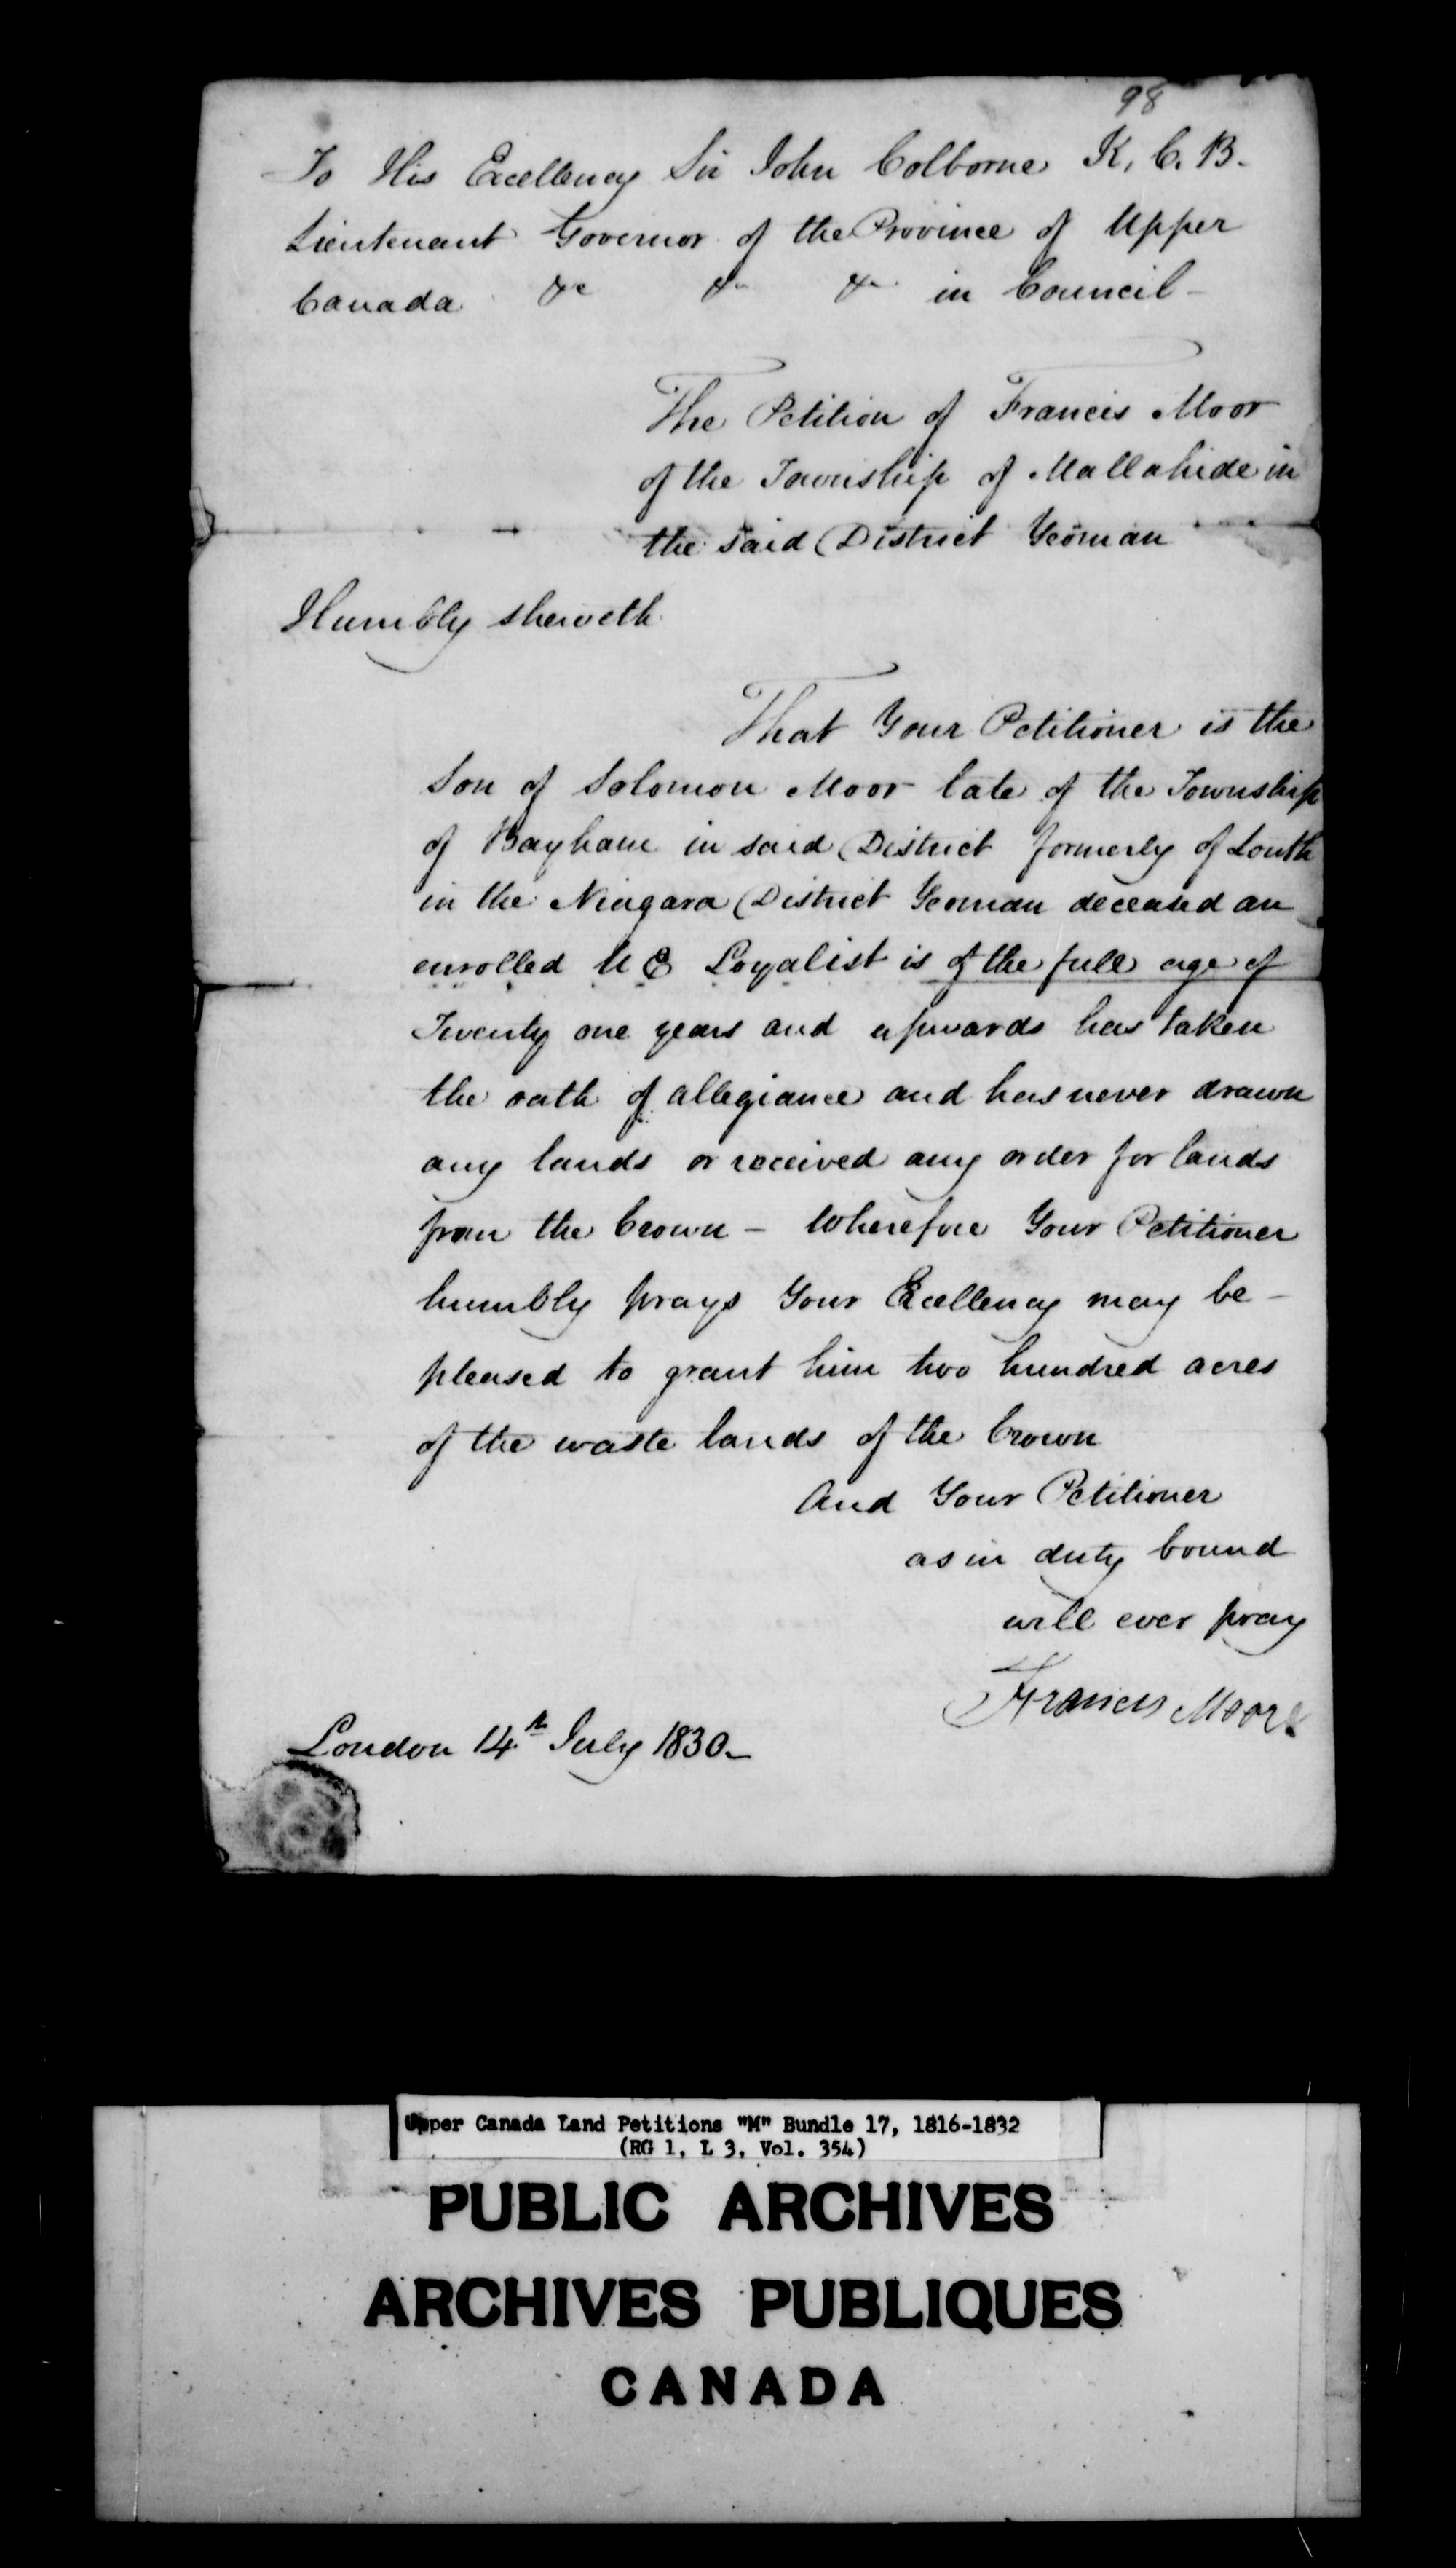 Title: Upper Canada Land Petitions (1763-1865) - Mikan Number: 205131 - Microform: c-2211